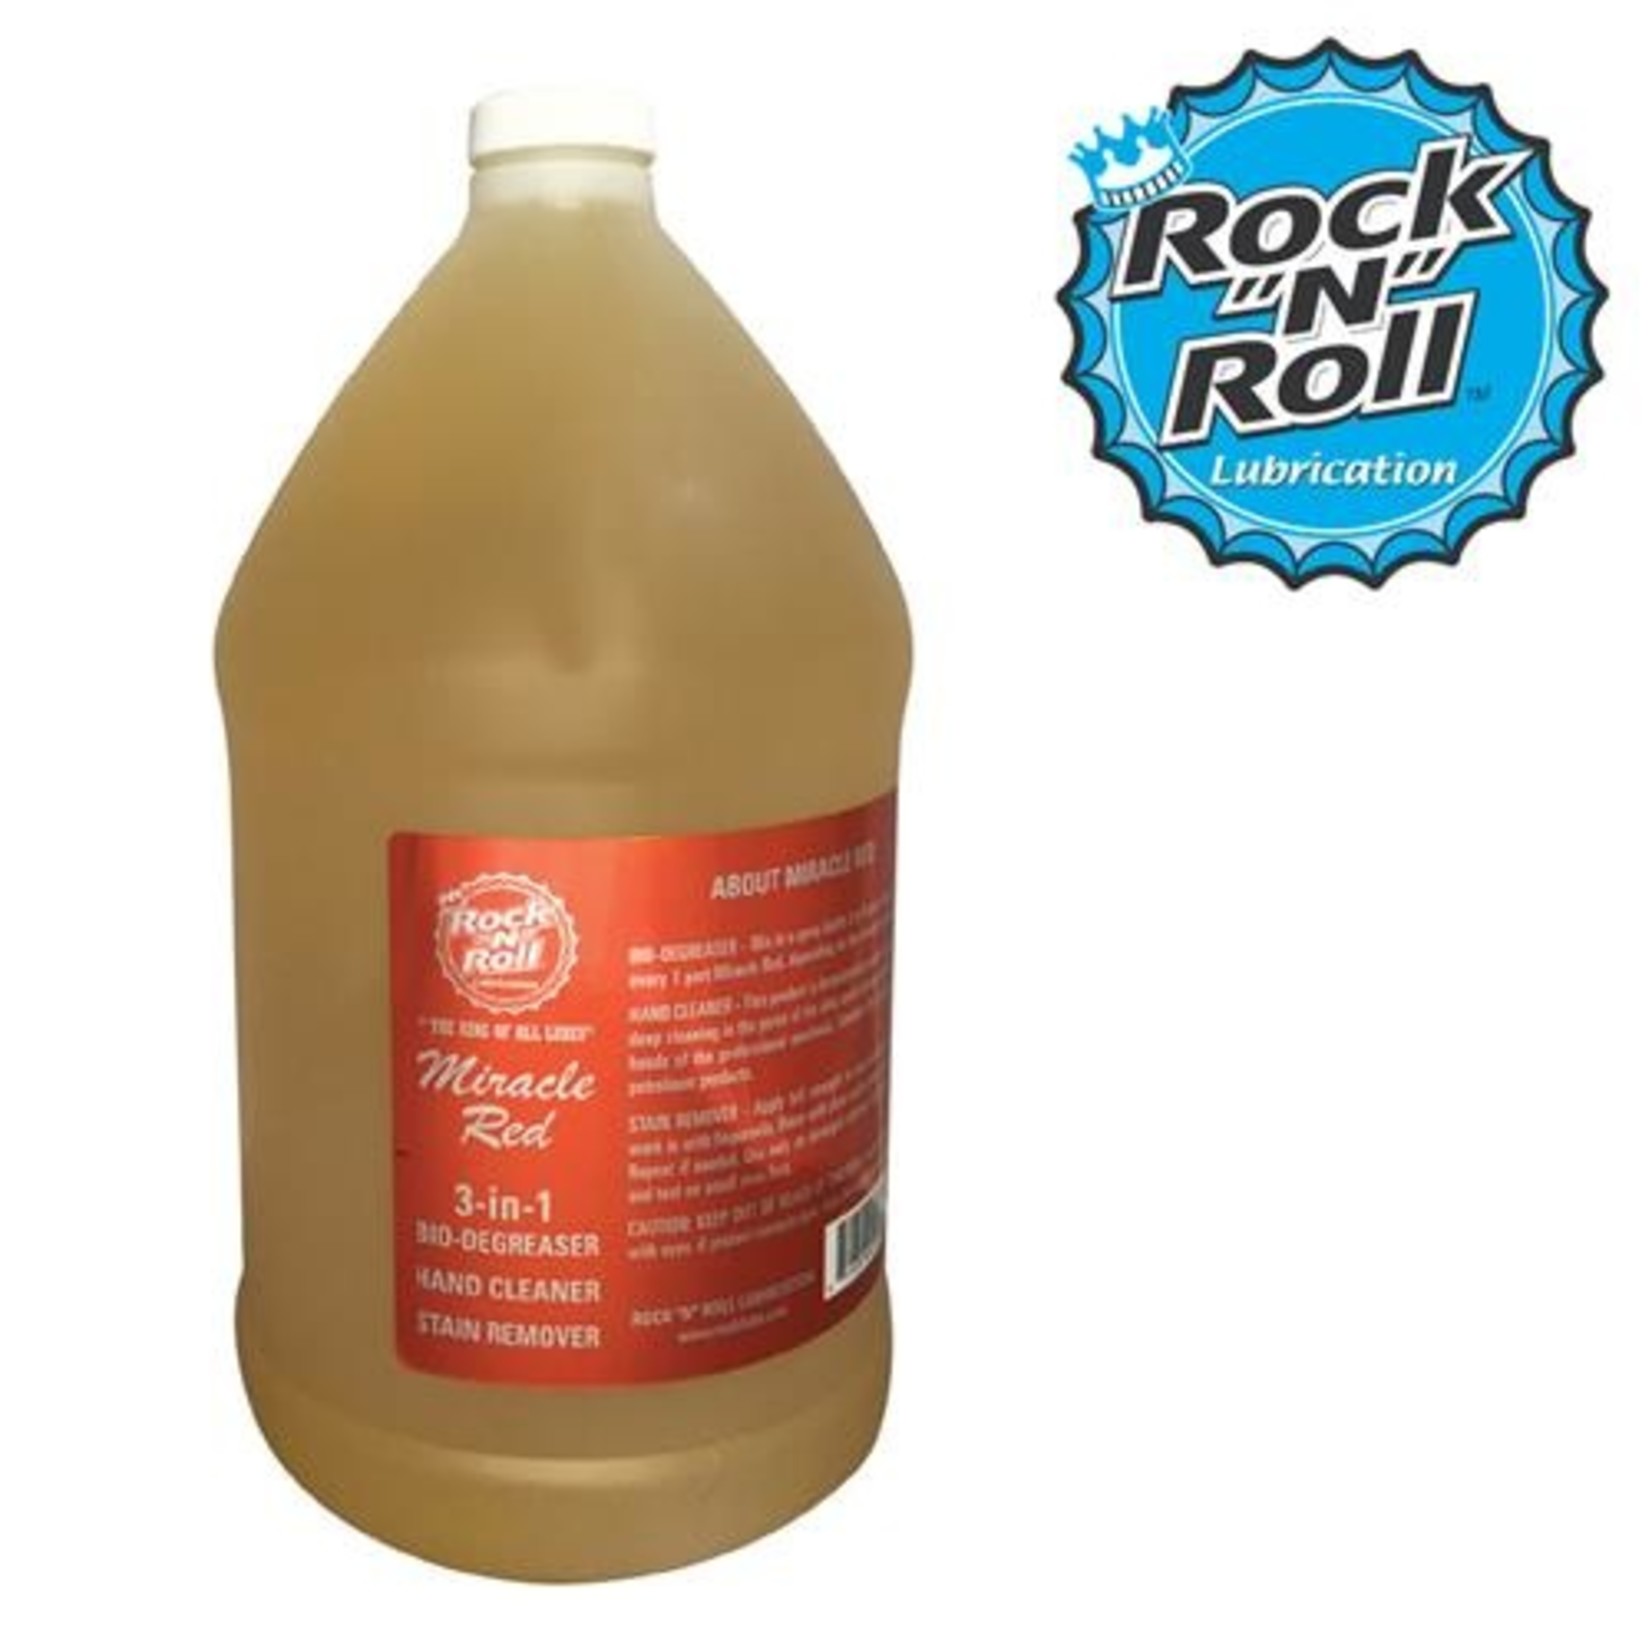 Rock N Roll Rock N Roll Bike/Cycling Miracle Red - 3-In-1 - Bio Degreaser - 4.5litre